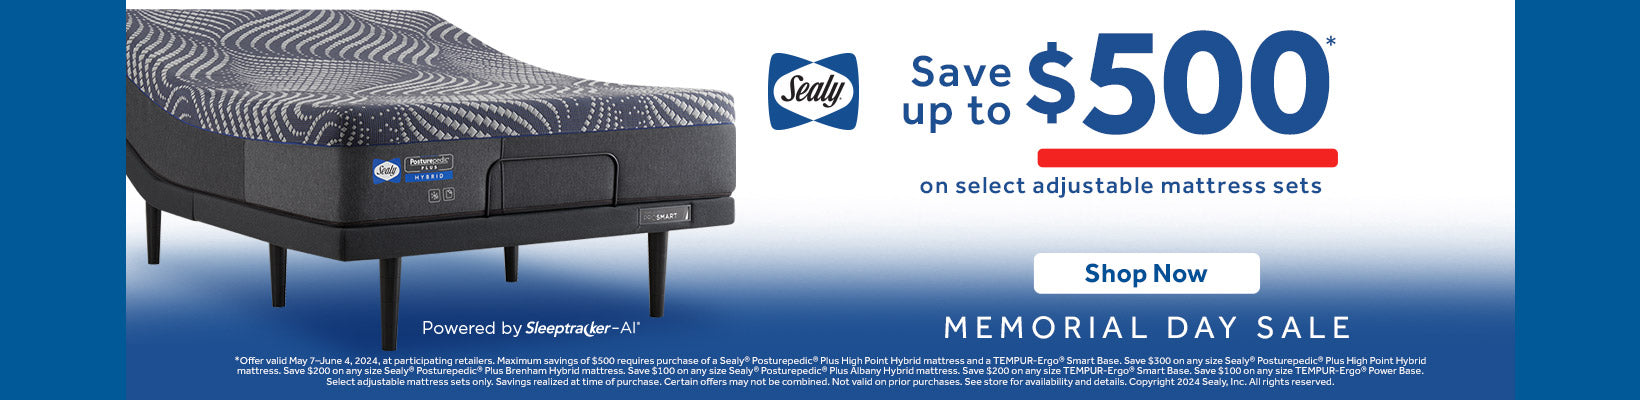 Sealy Memorial Day Sale Save up to $500 on Select Adjustable Mattress Sets